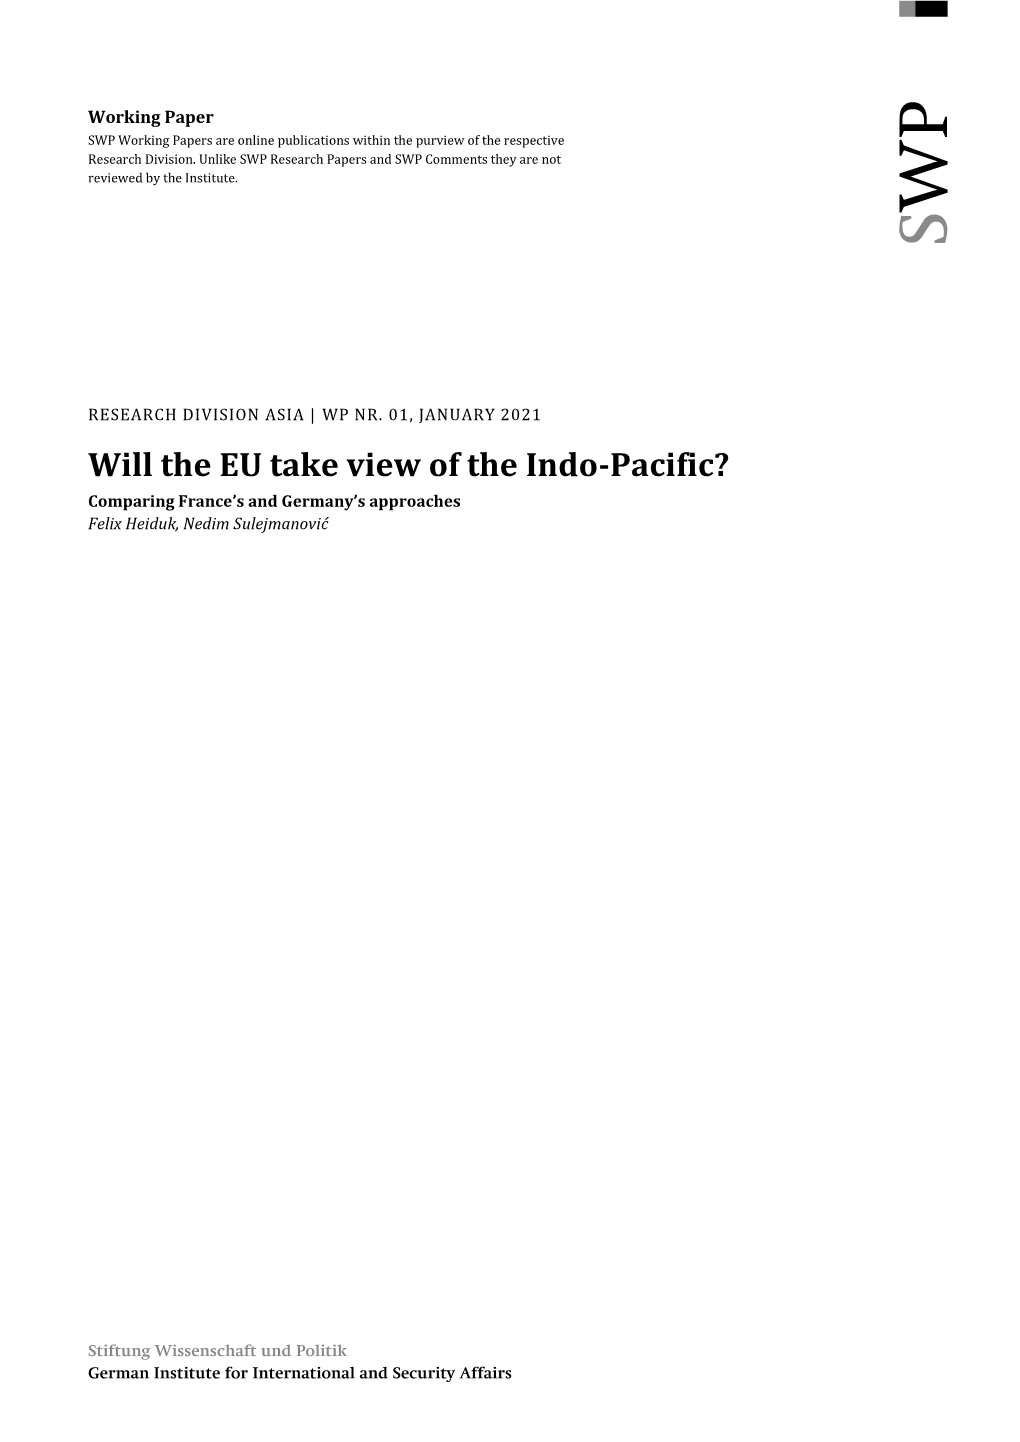 Will the EU Take View of the Indo-Pacific? Comparing France’S and Germany’S Approaches Felix Heiduk, Nedim Sulejmanović